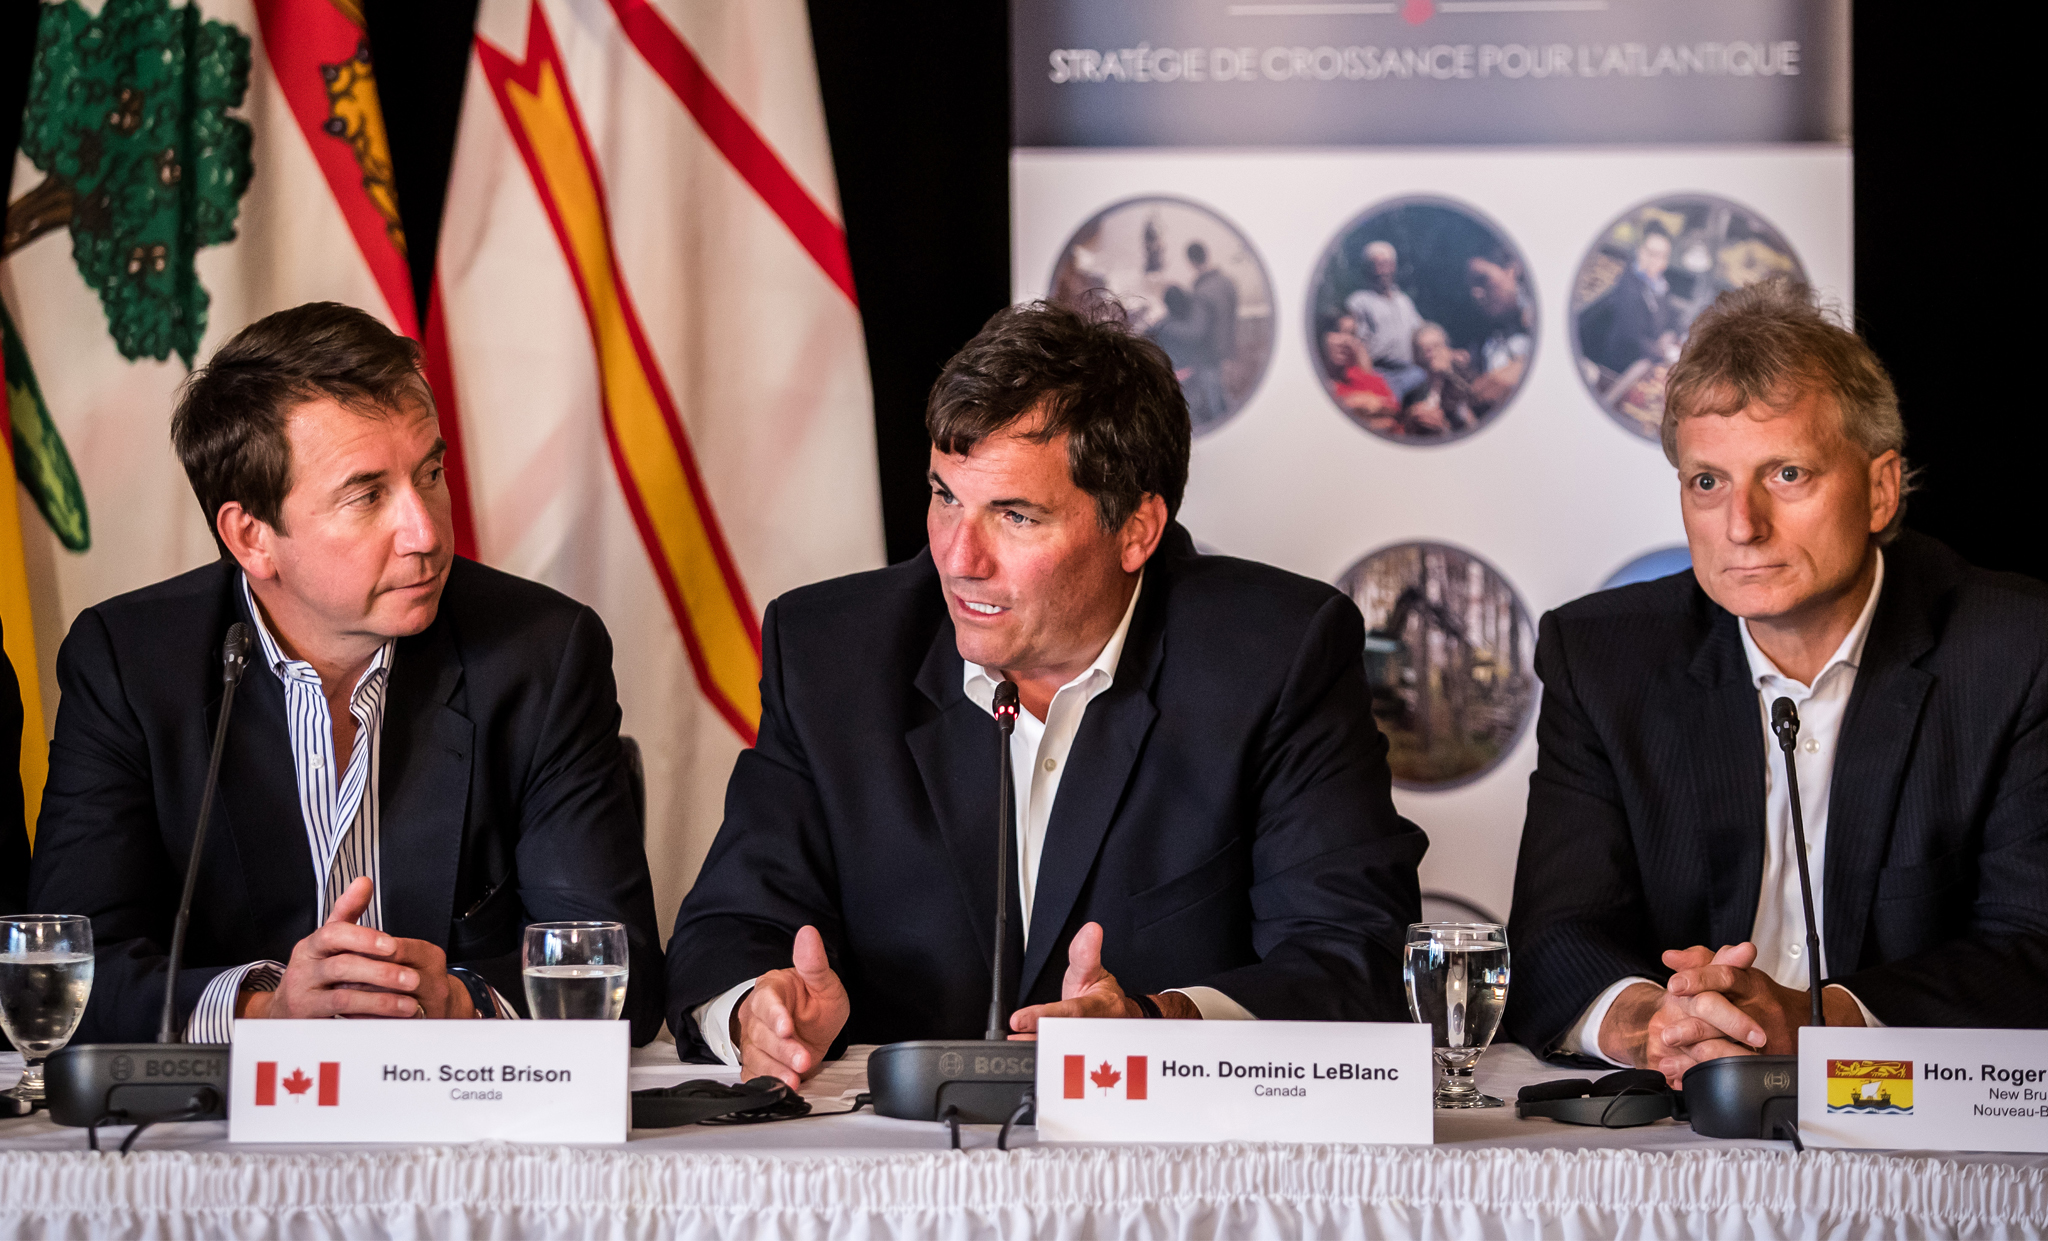 July 11, 2017 - Minister of Fisheries, Oceans and Canadian Coast Guard Dominic LeBlanc speaks at July 11, 2017, Atlantic Growth Strategy news conference in Humber Valley, NL. Also in the photo, Treasury Board President Scott Brison and Province of New Brunswick Minister responsible for Trade Policy Roger Melanson.